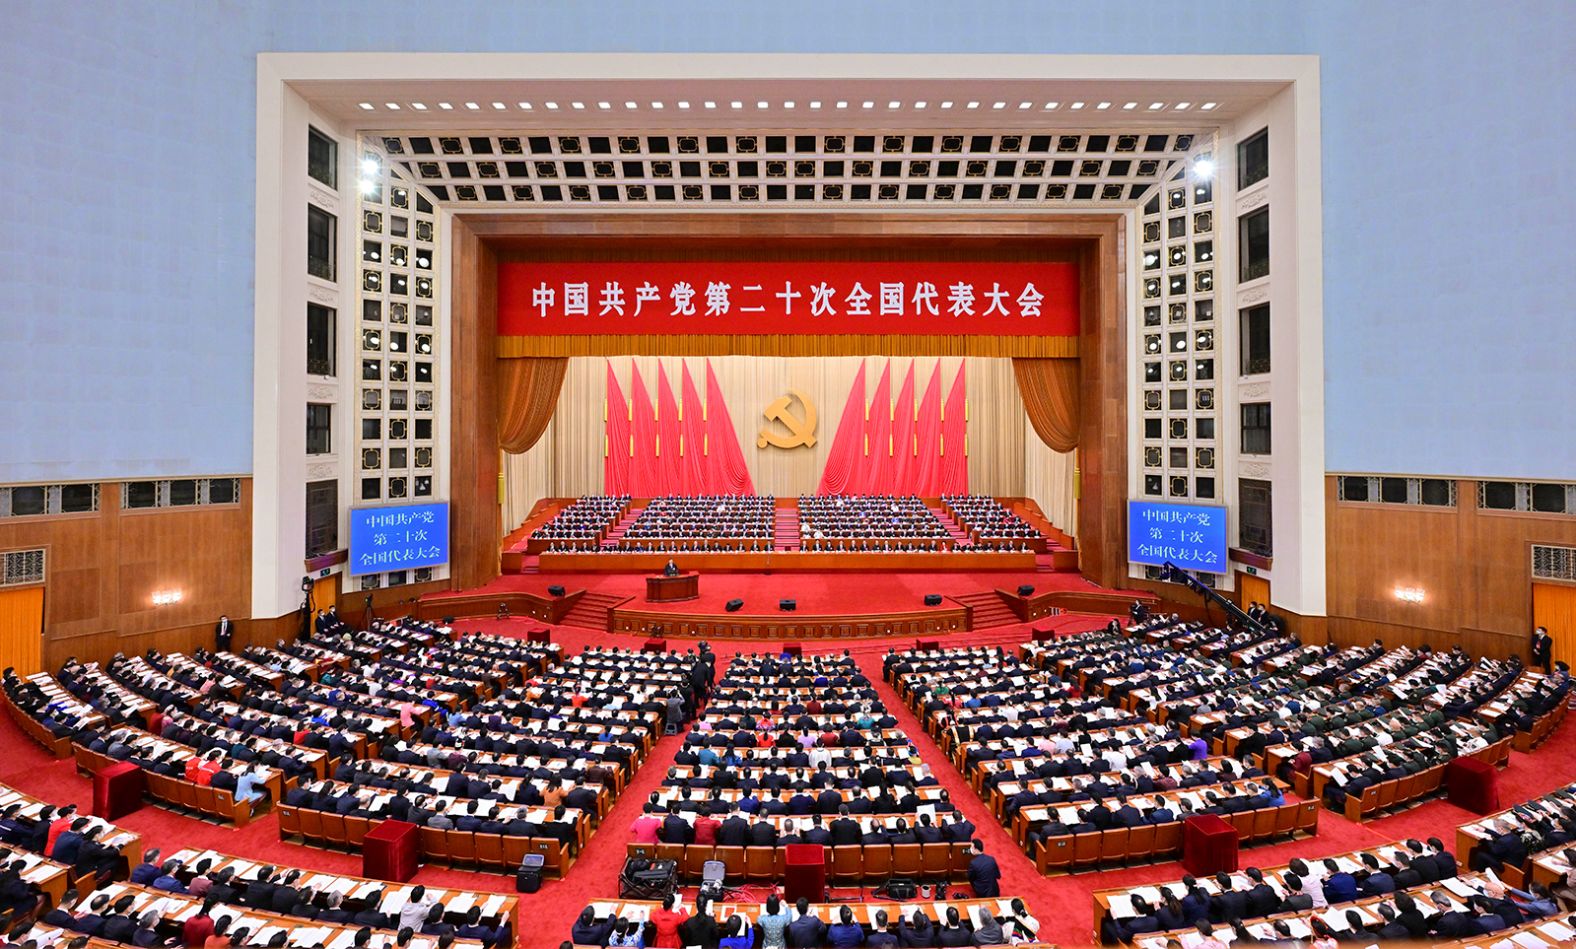 A view of the the Great Hall of the People during the opening ceremony.